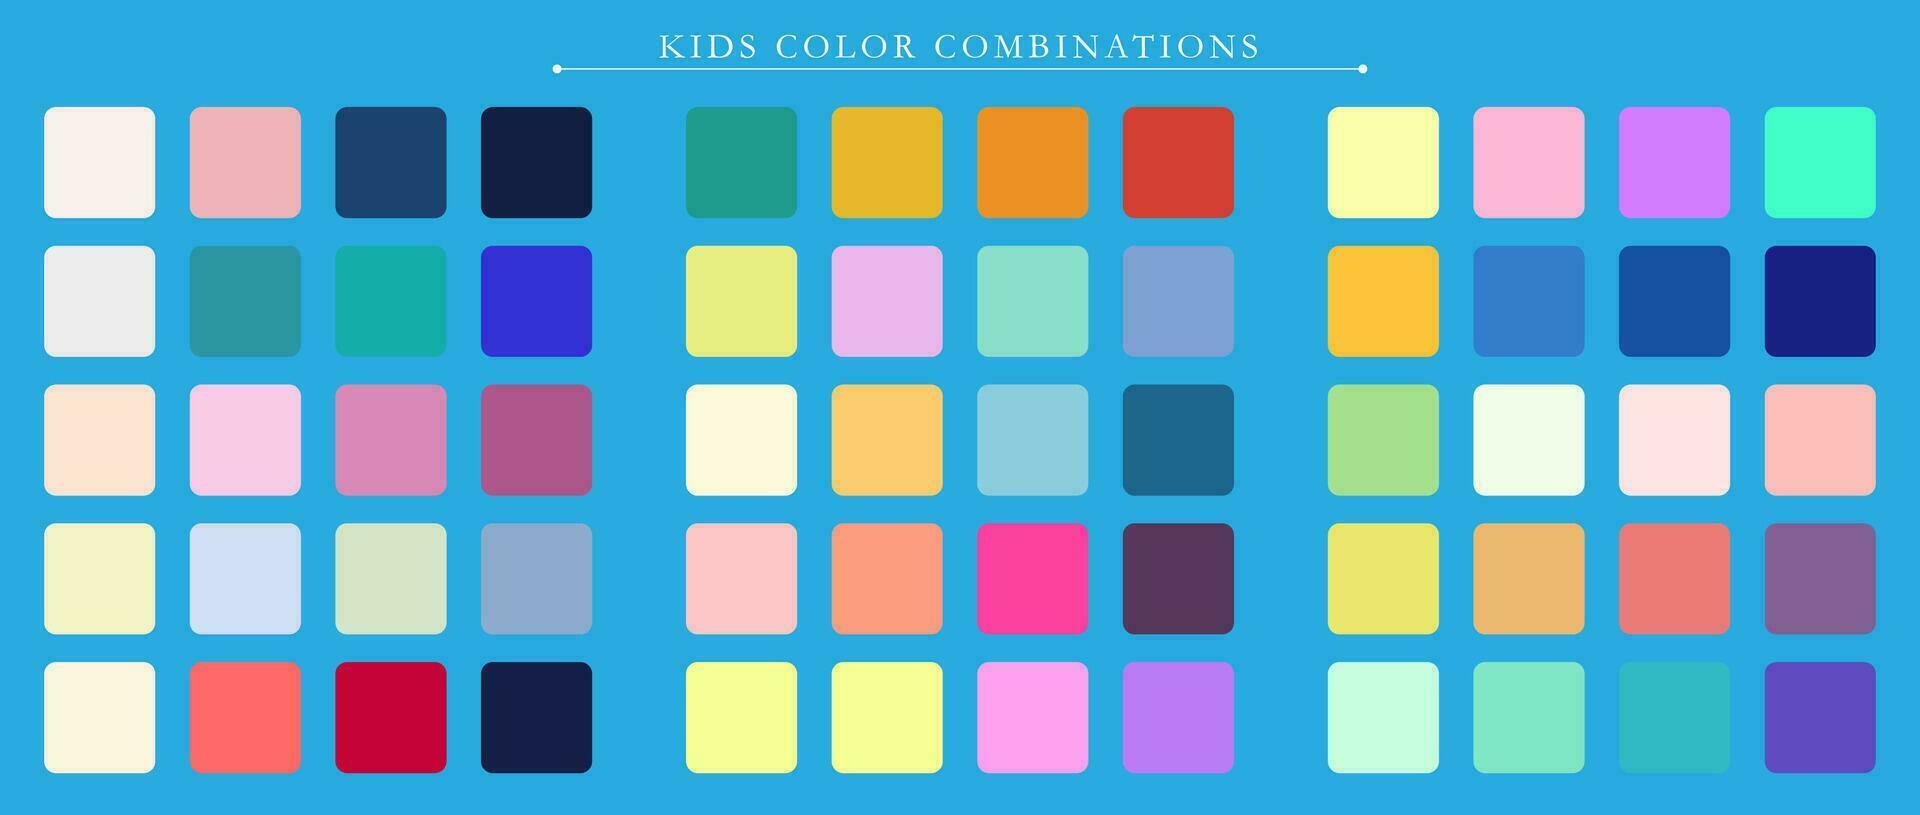 Kids palette. Trend color palette guide template. An example of a color palette. Forecast of the future color trend. Match color combinations. Vector graphics. Eps 10.